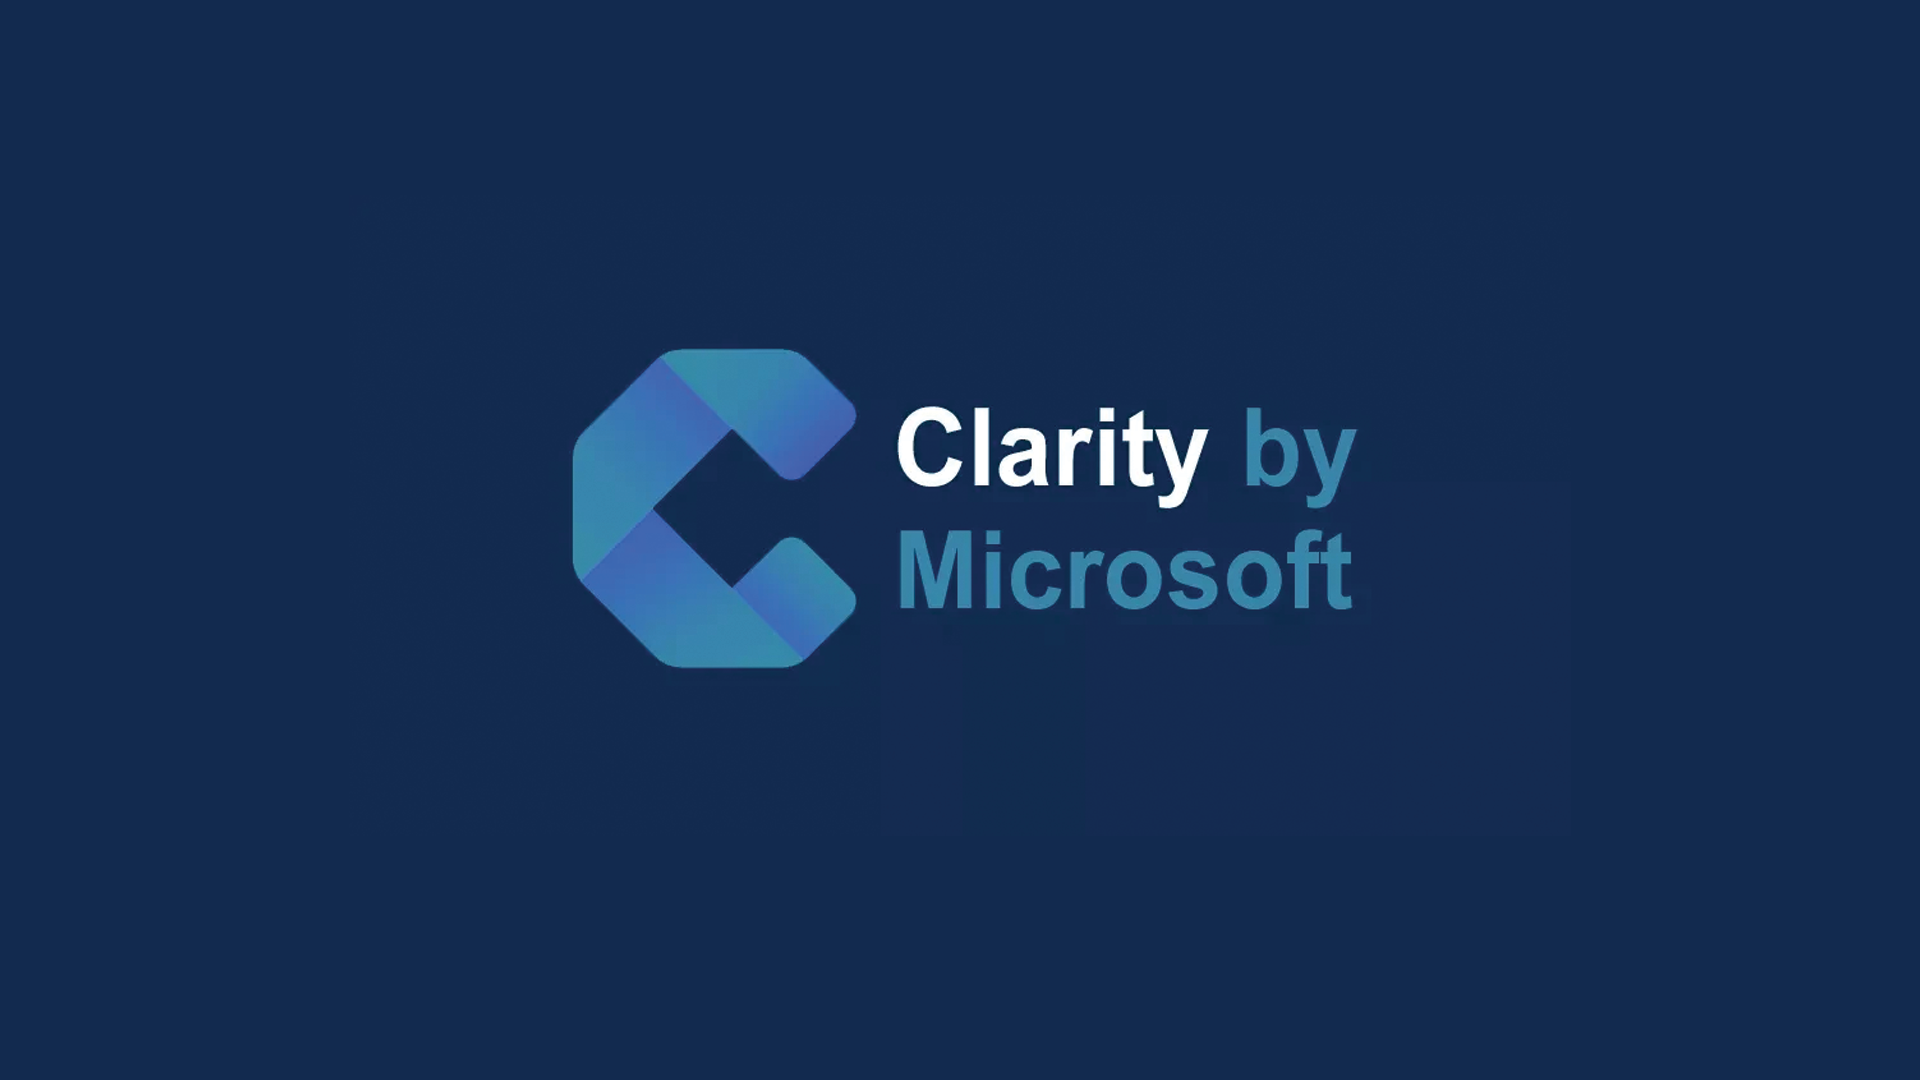 Microsoft Clarity, a fierce competitor to Google Analytics